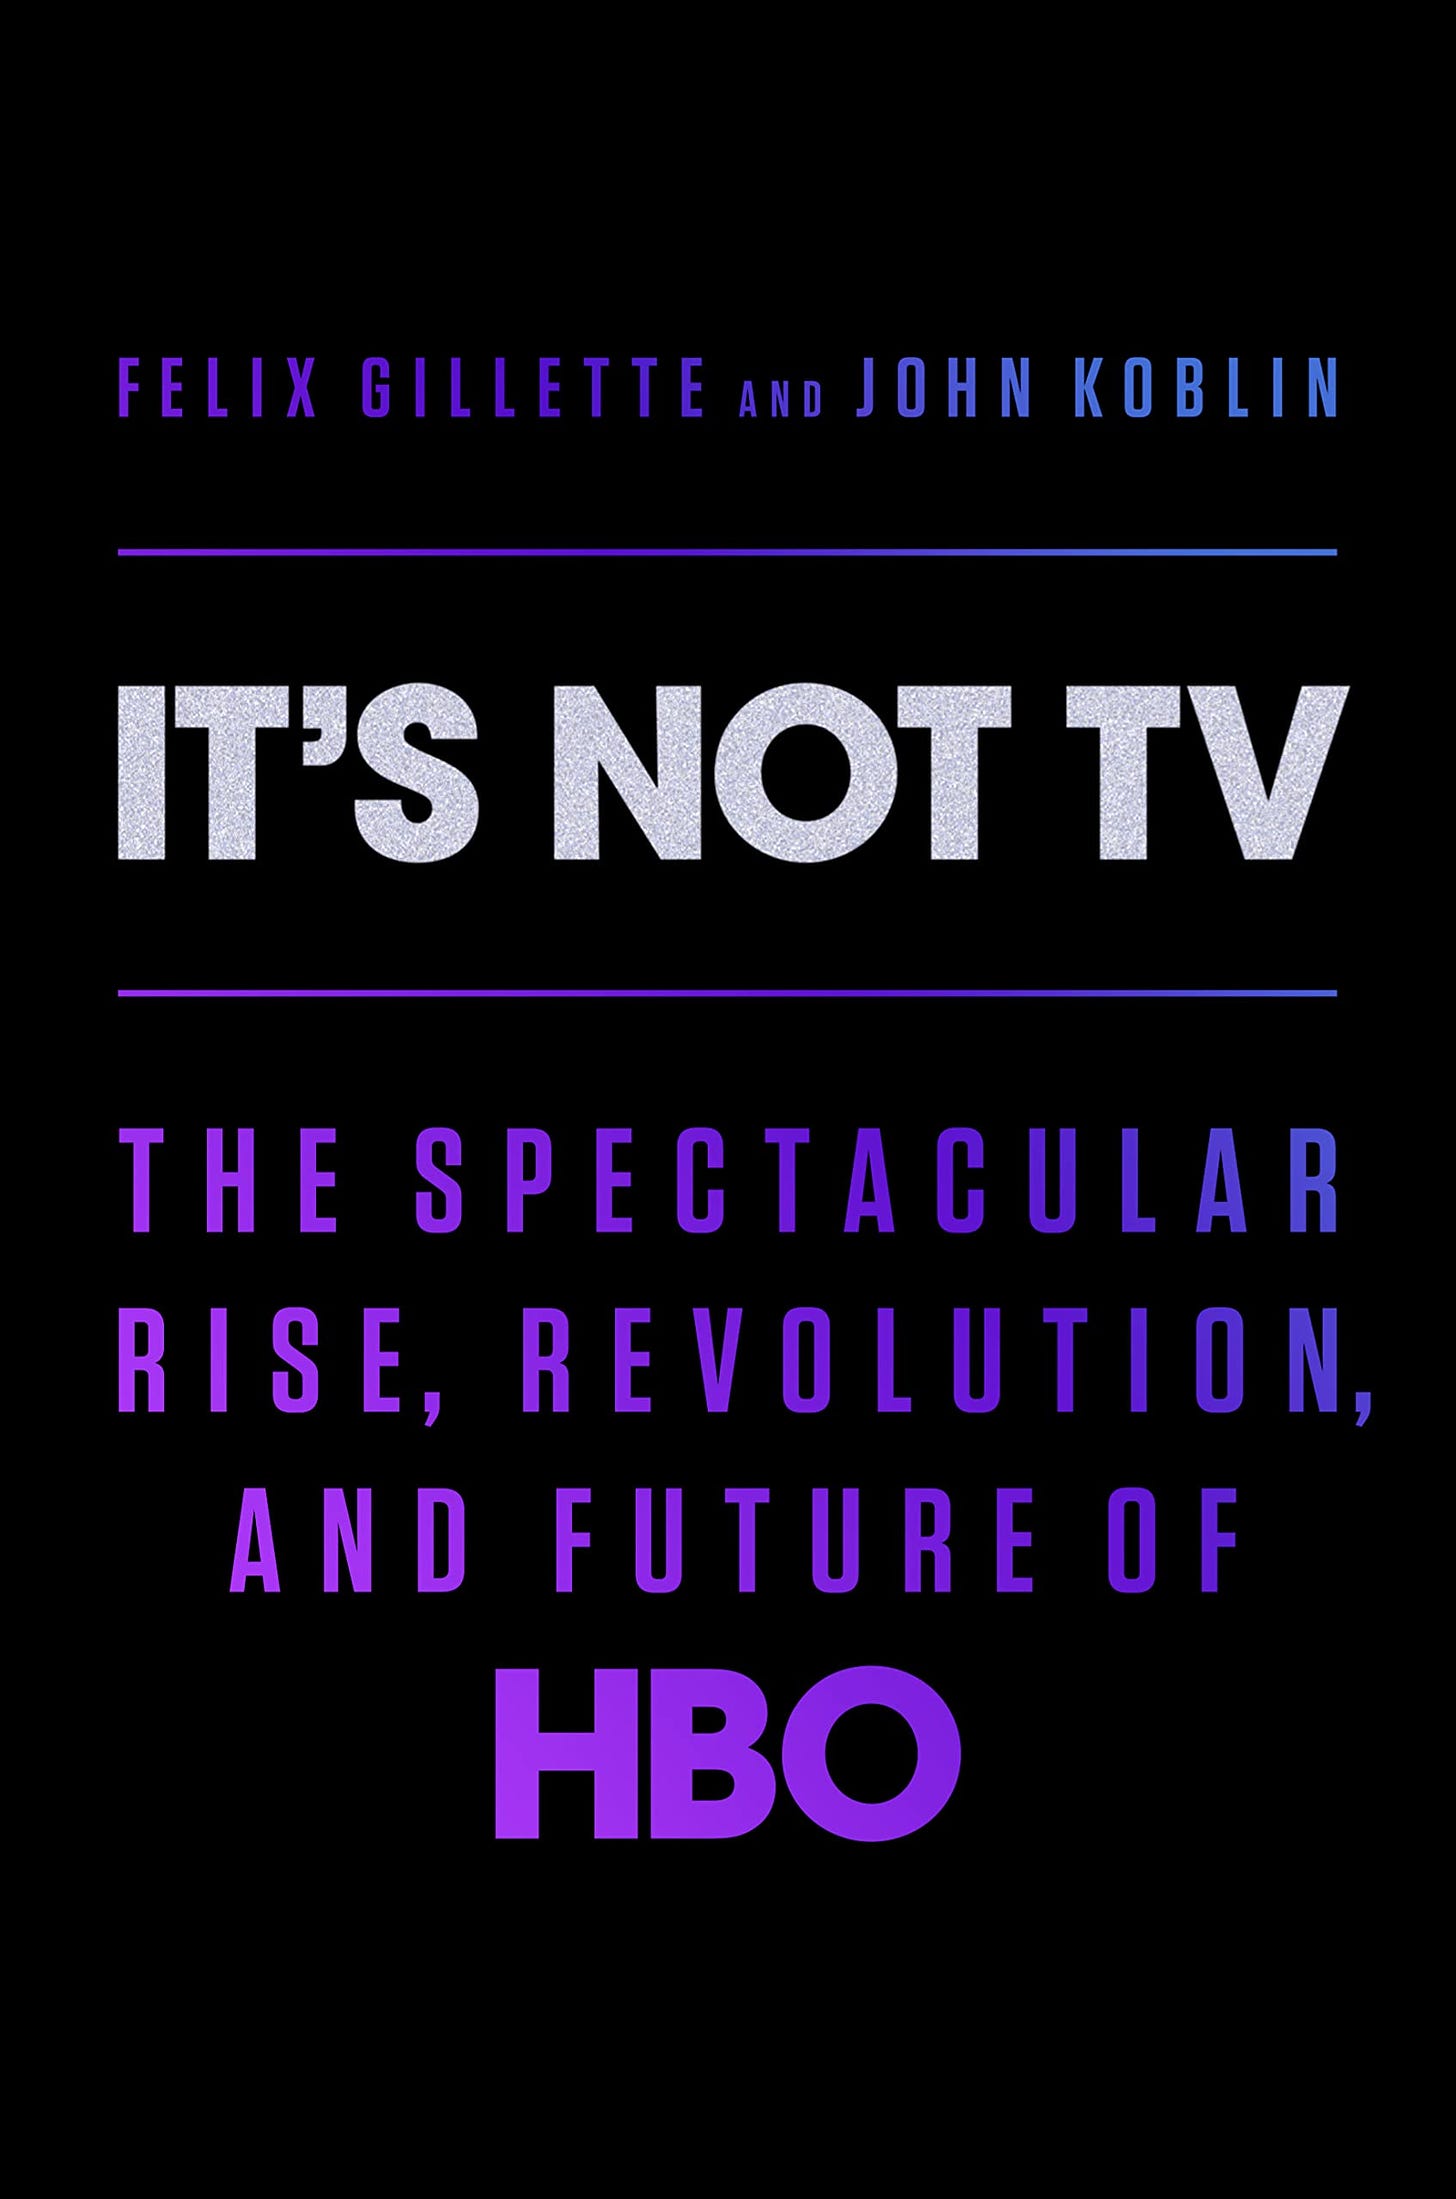 It's Not TV: The Spectacular Rise, Revolution, and Future of HBO :  Gillette, Felix, Koblin, John: Amazon.ca: Books